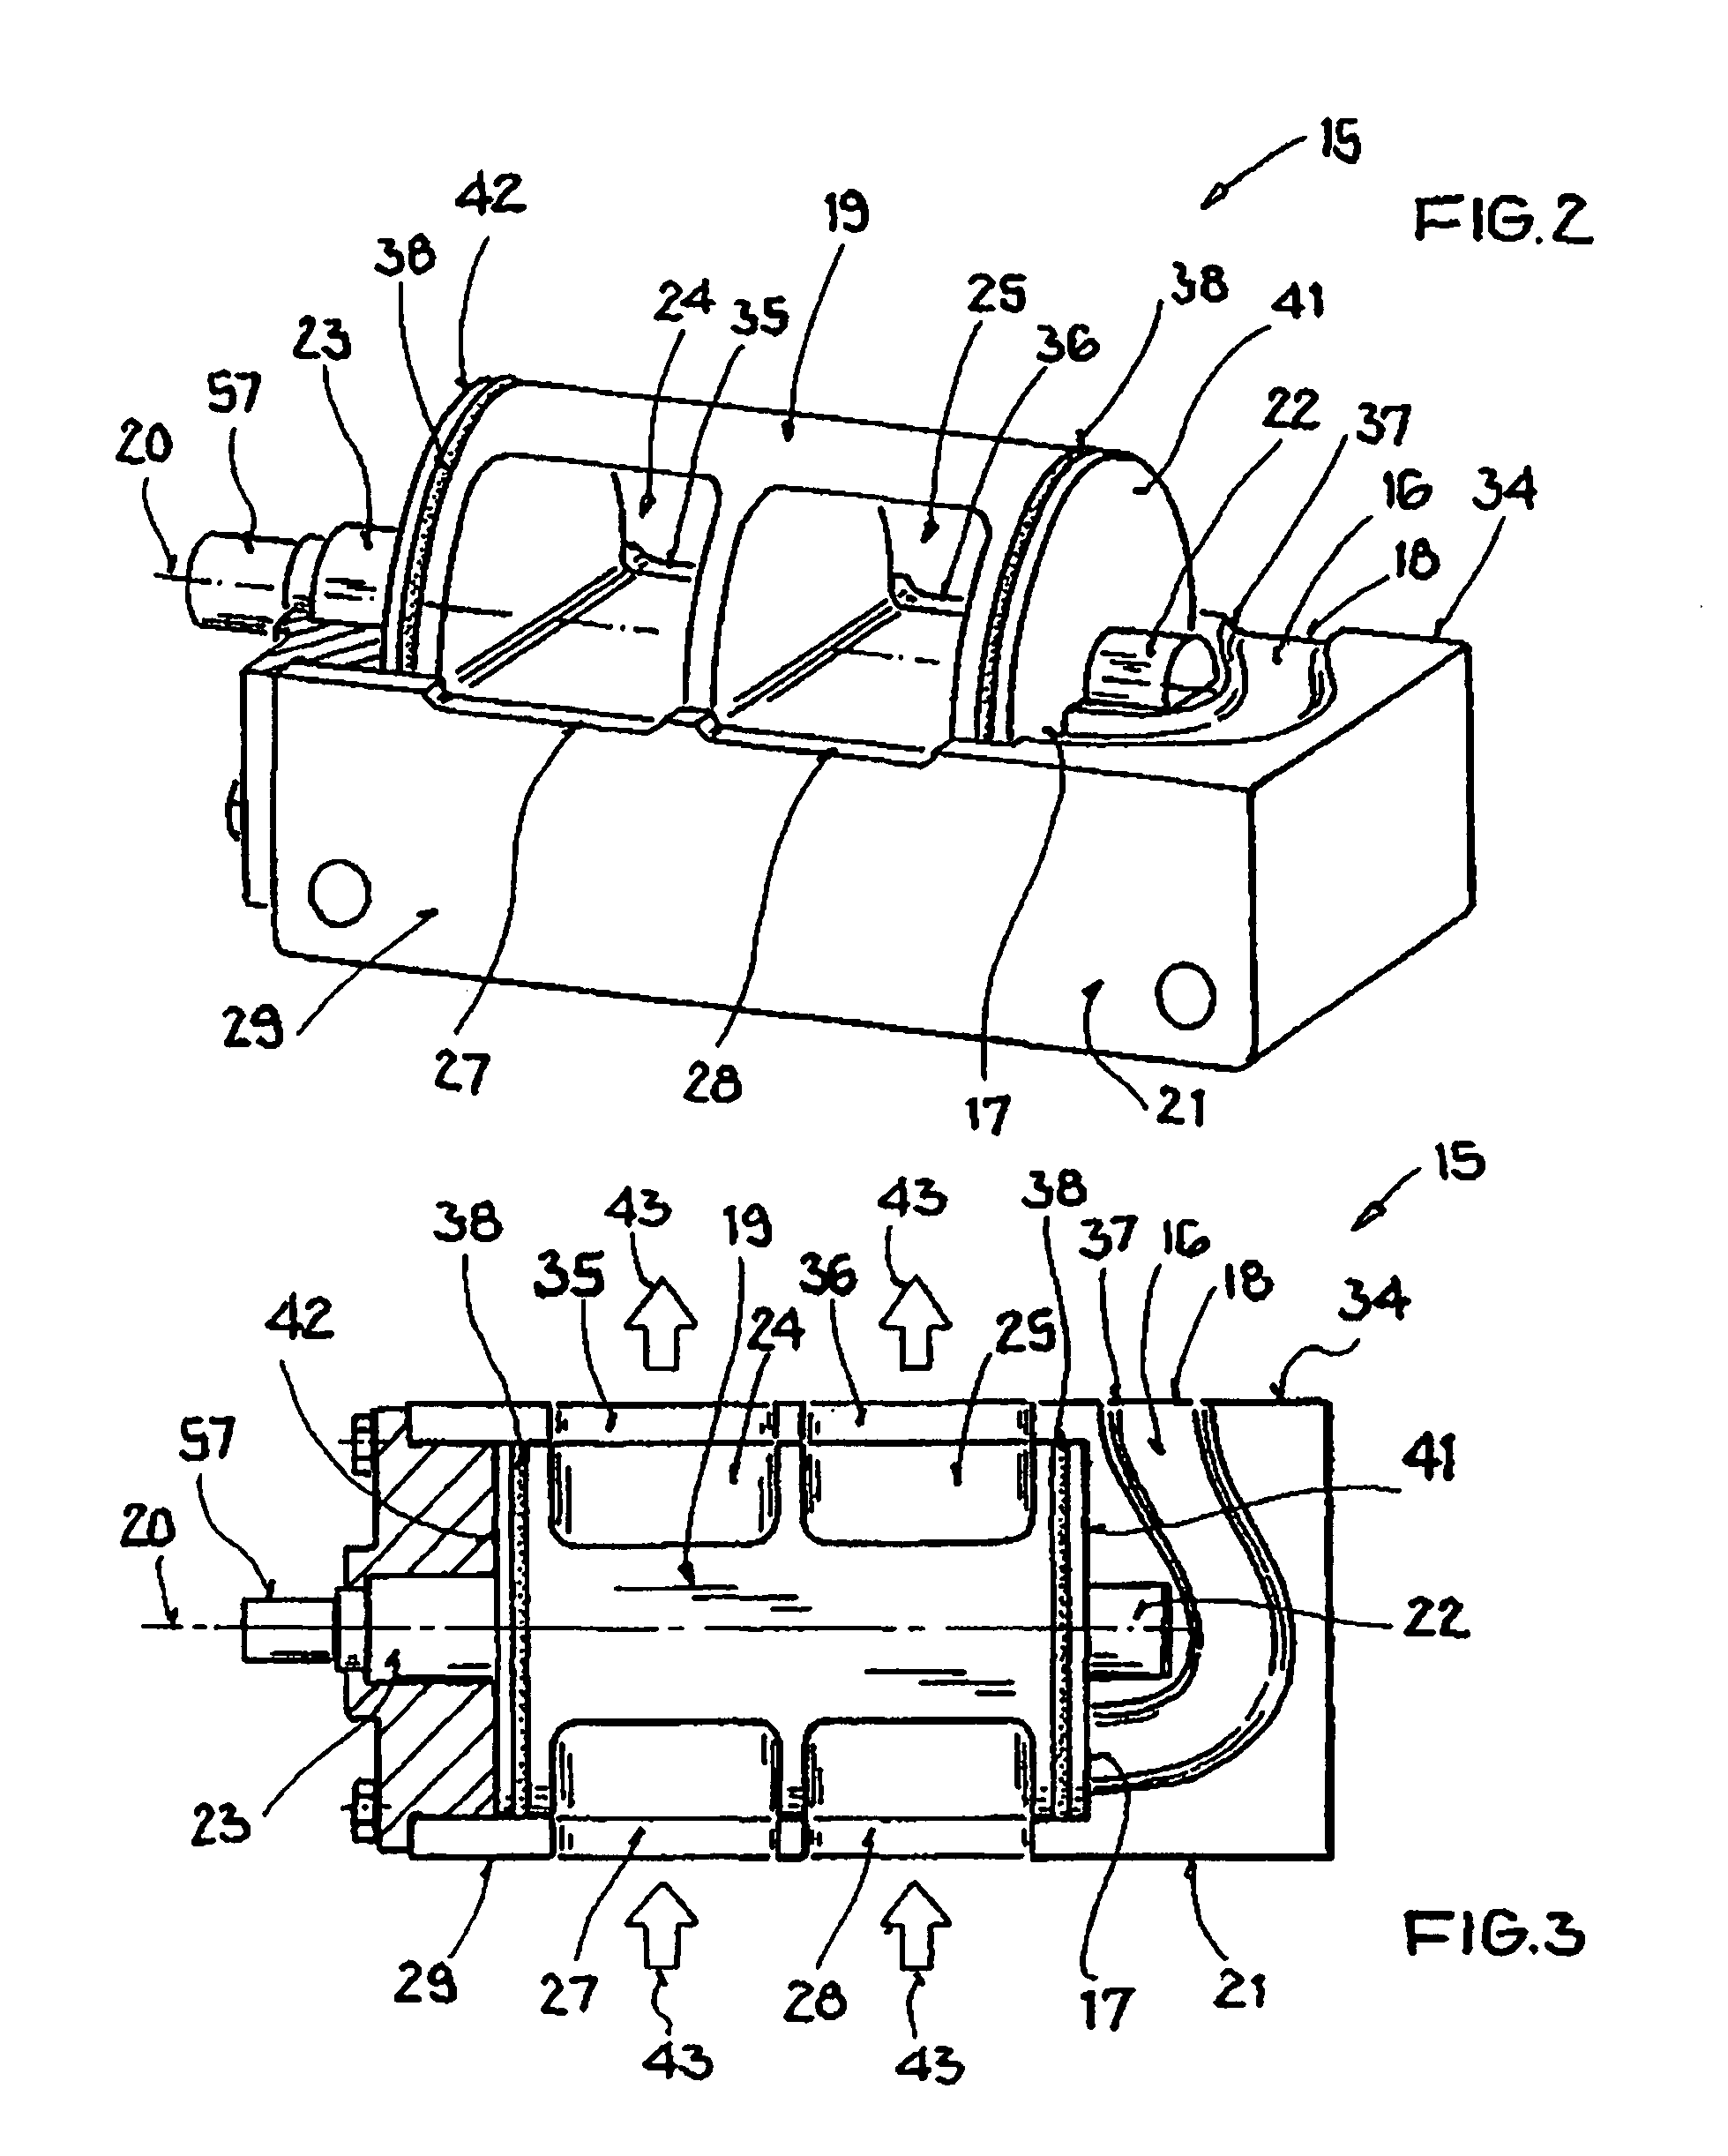 Exhaust-gas turbocharger for an internal combustion engine